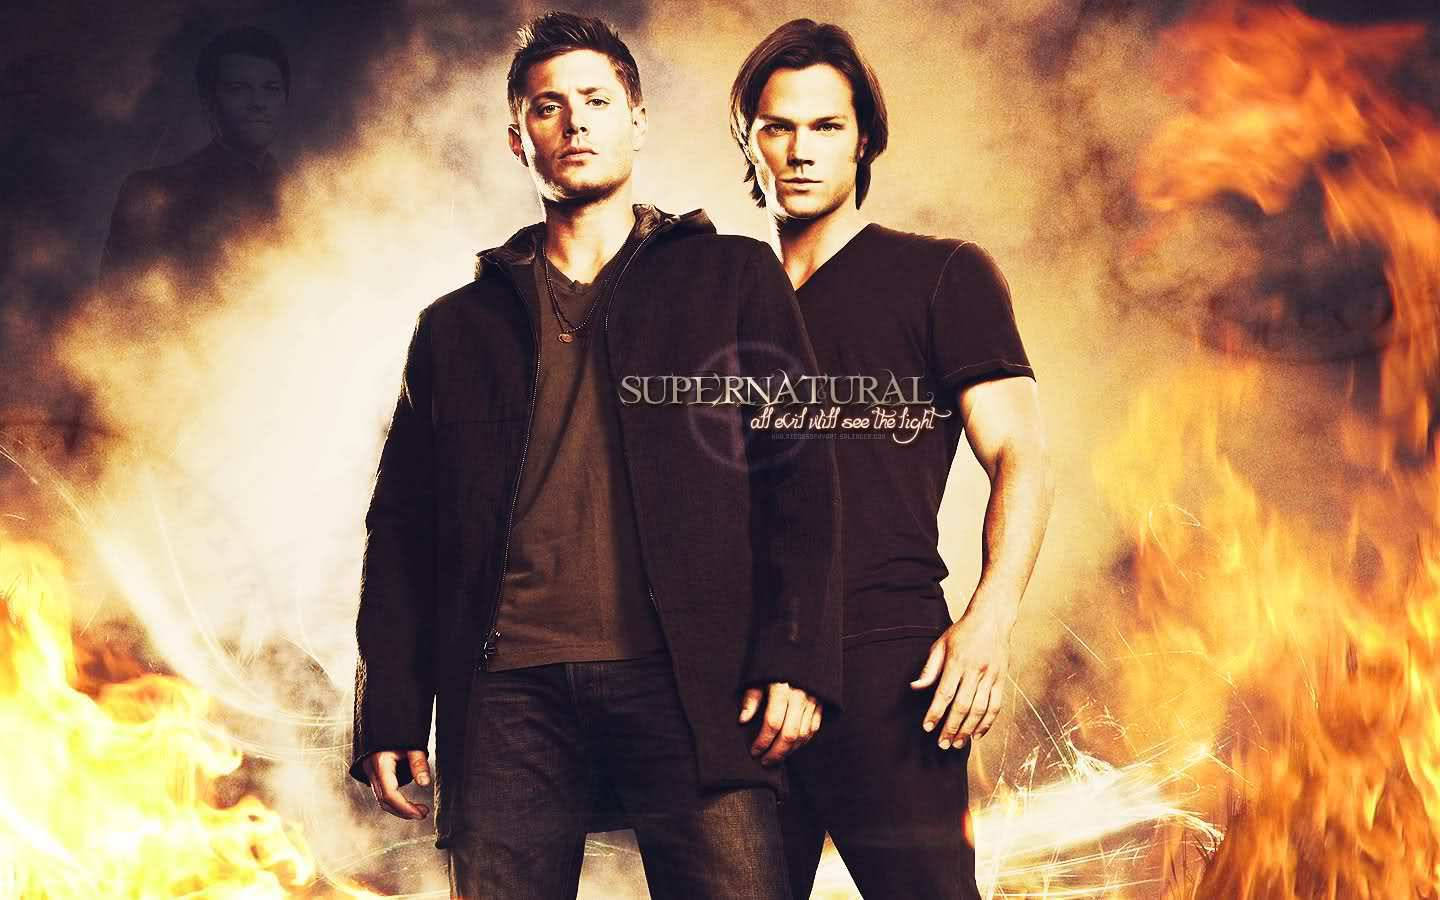 The Winchester Brothers Team Up To Save The World